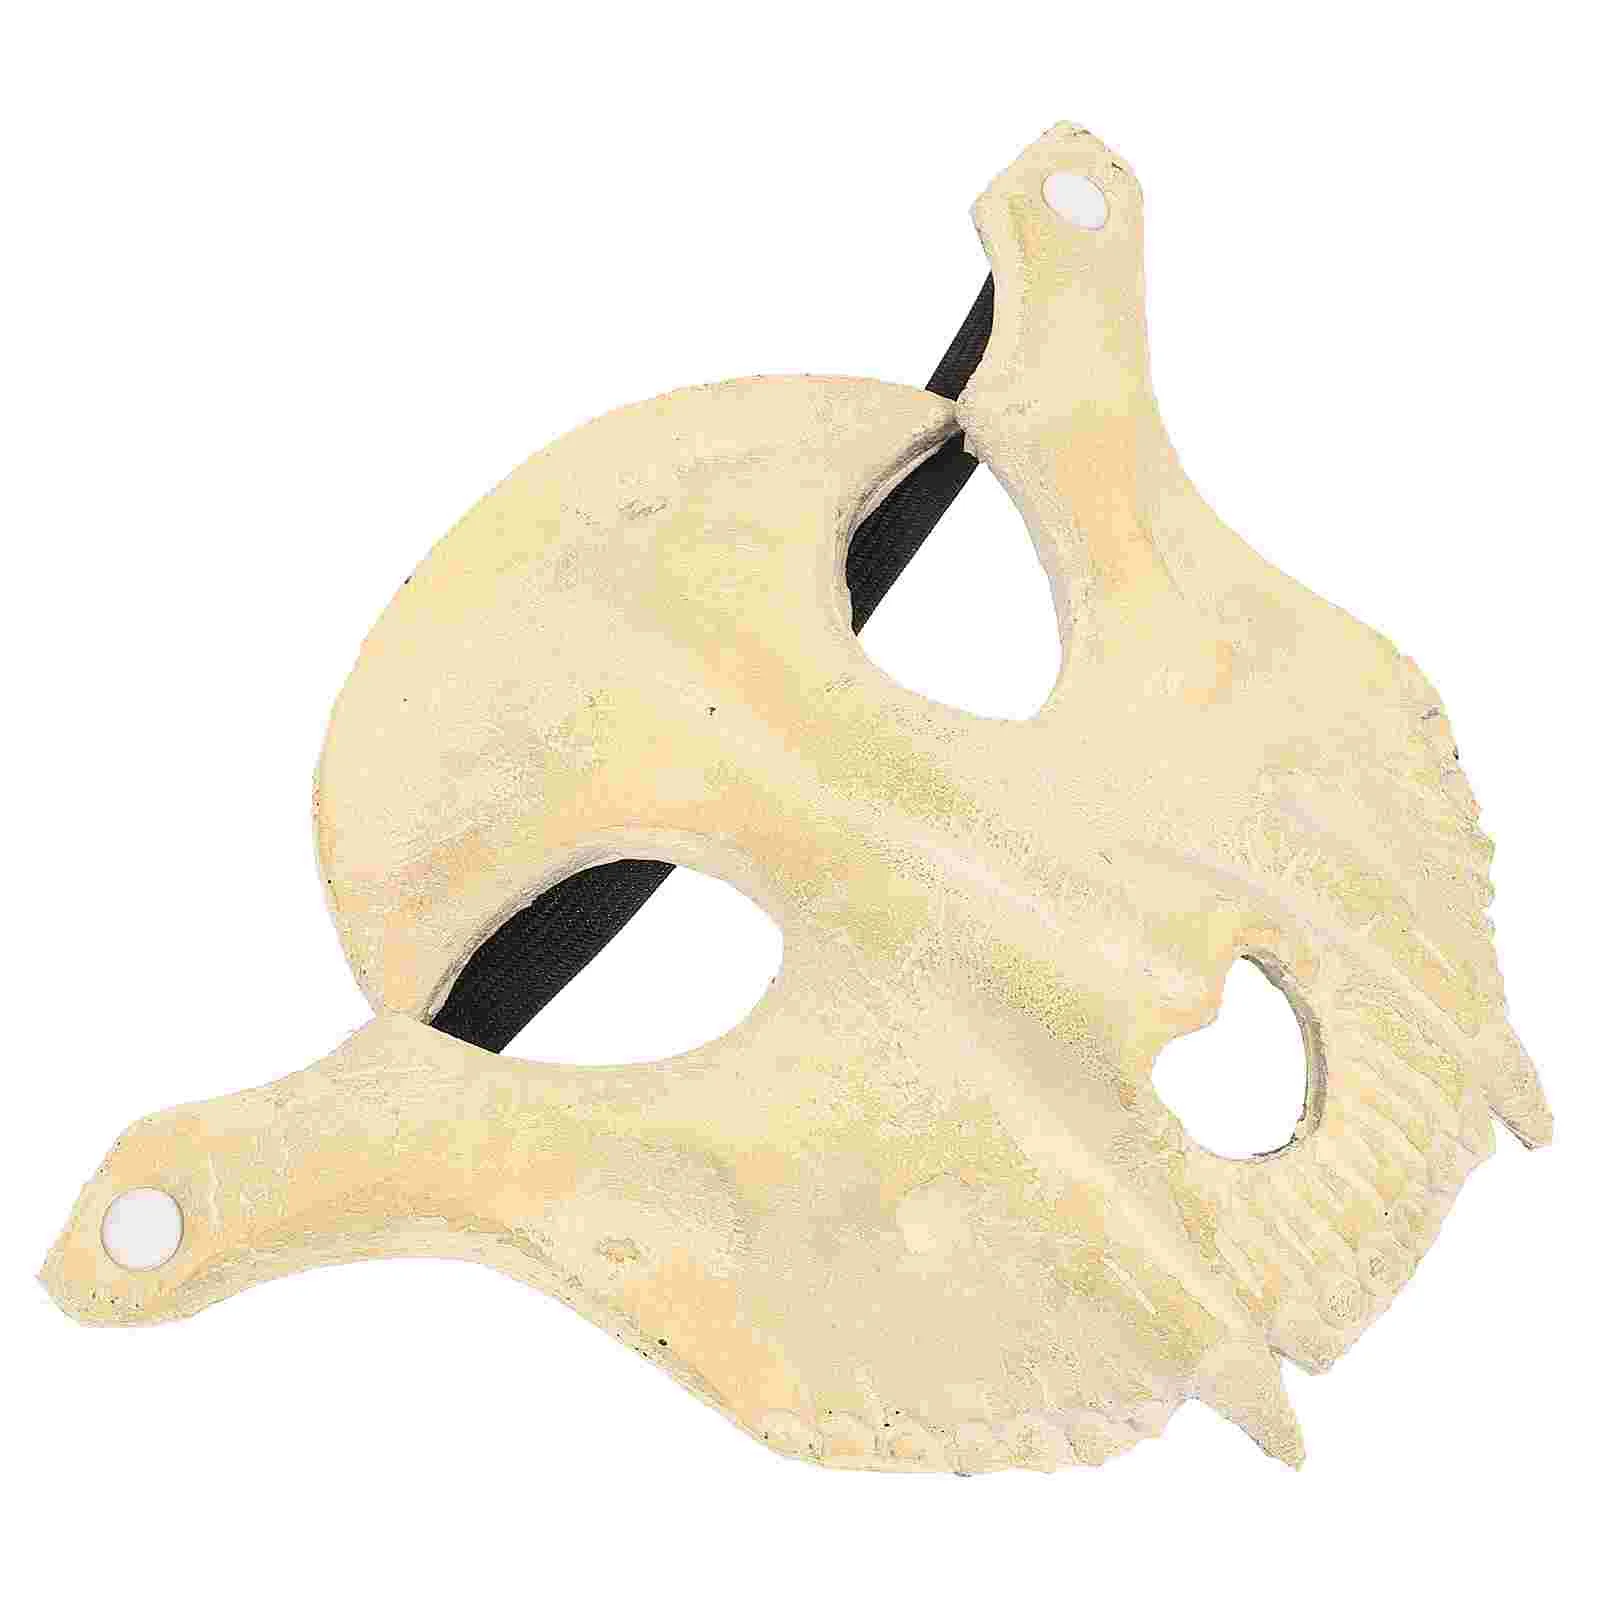 

PU Foaming Material Halloween Party Horror Sheep Shape Decoration Use Mask (Beige)